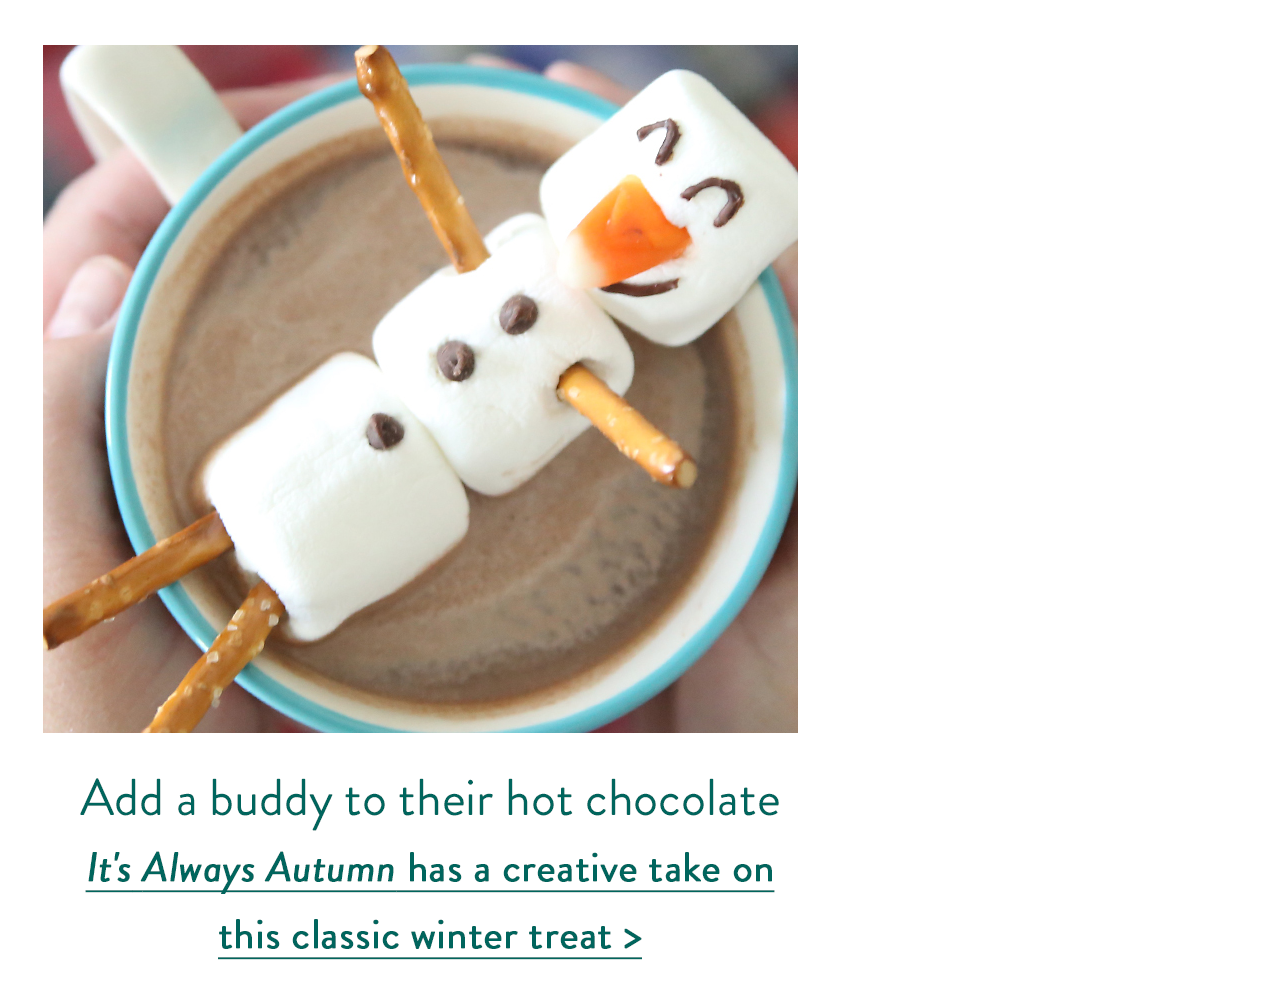 Add a buddy to their hot chocolate